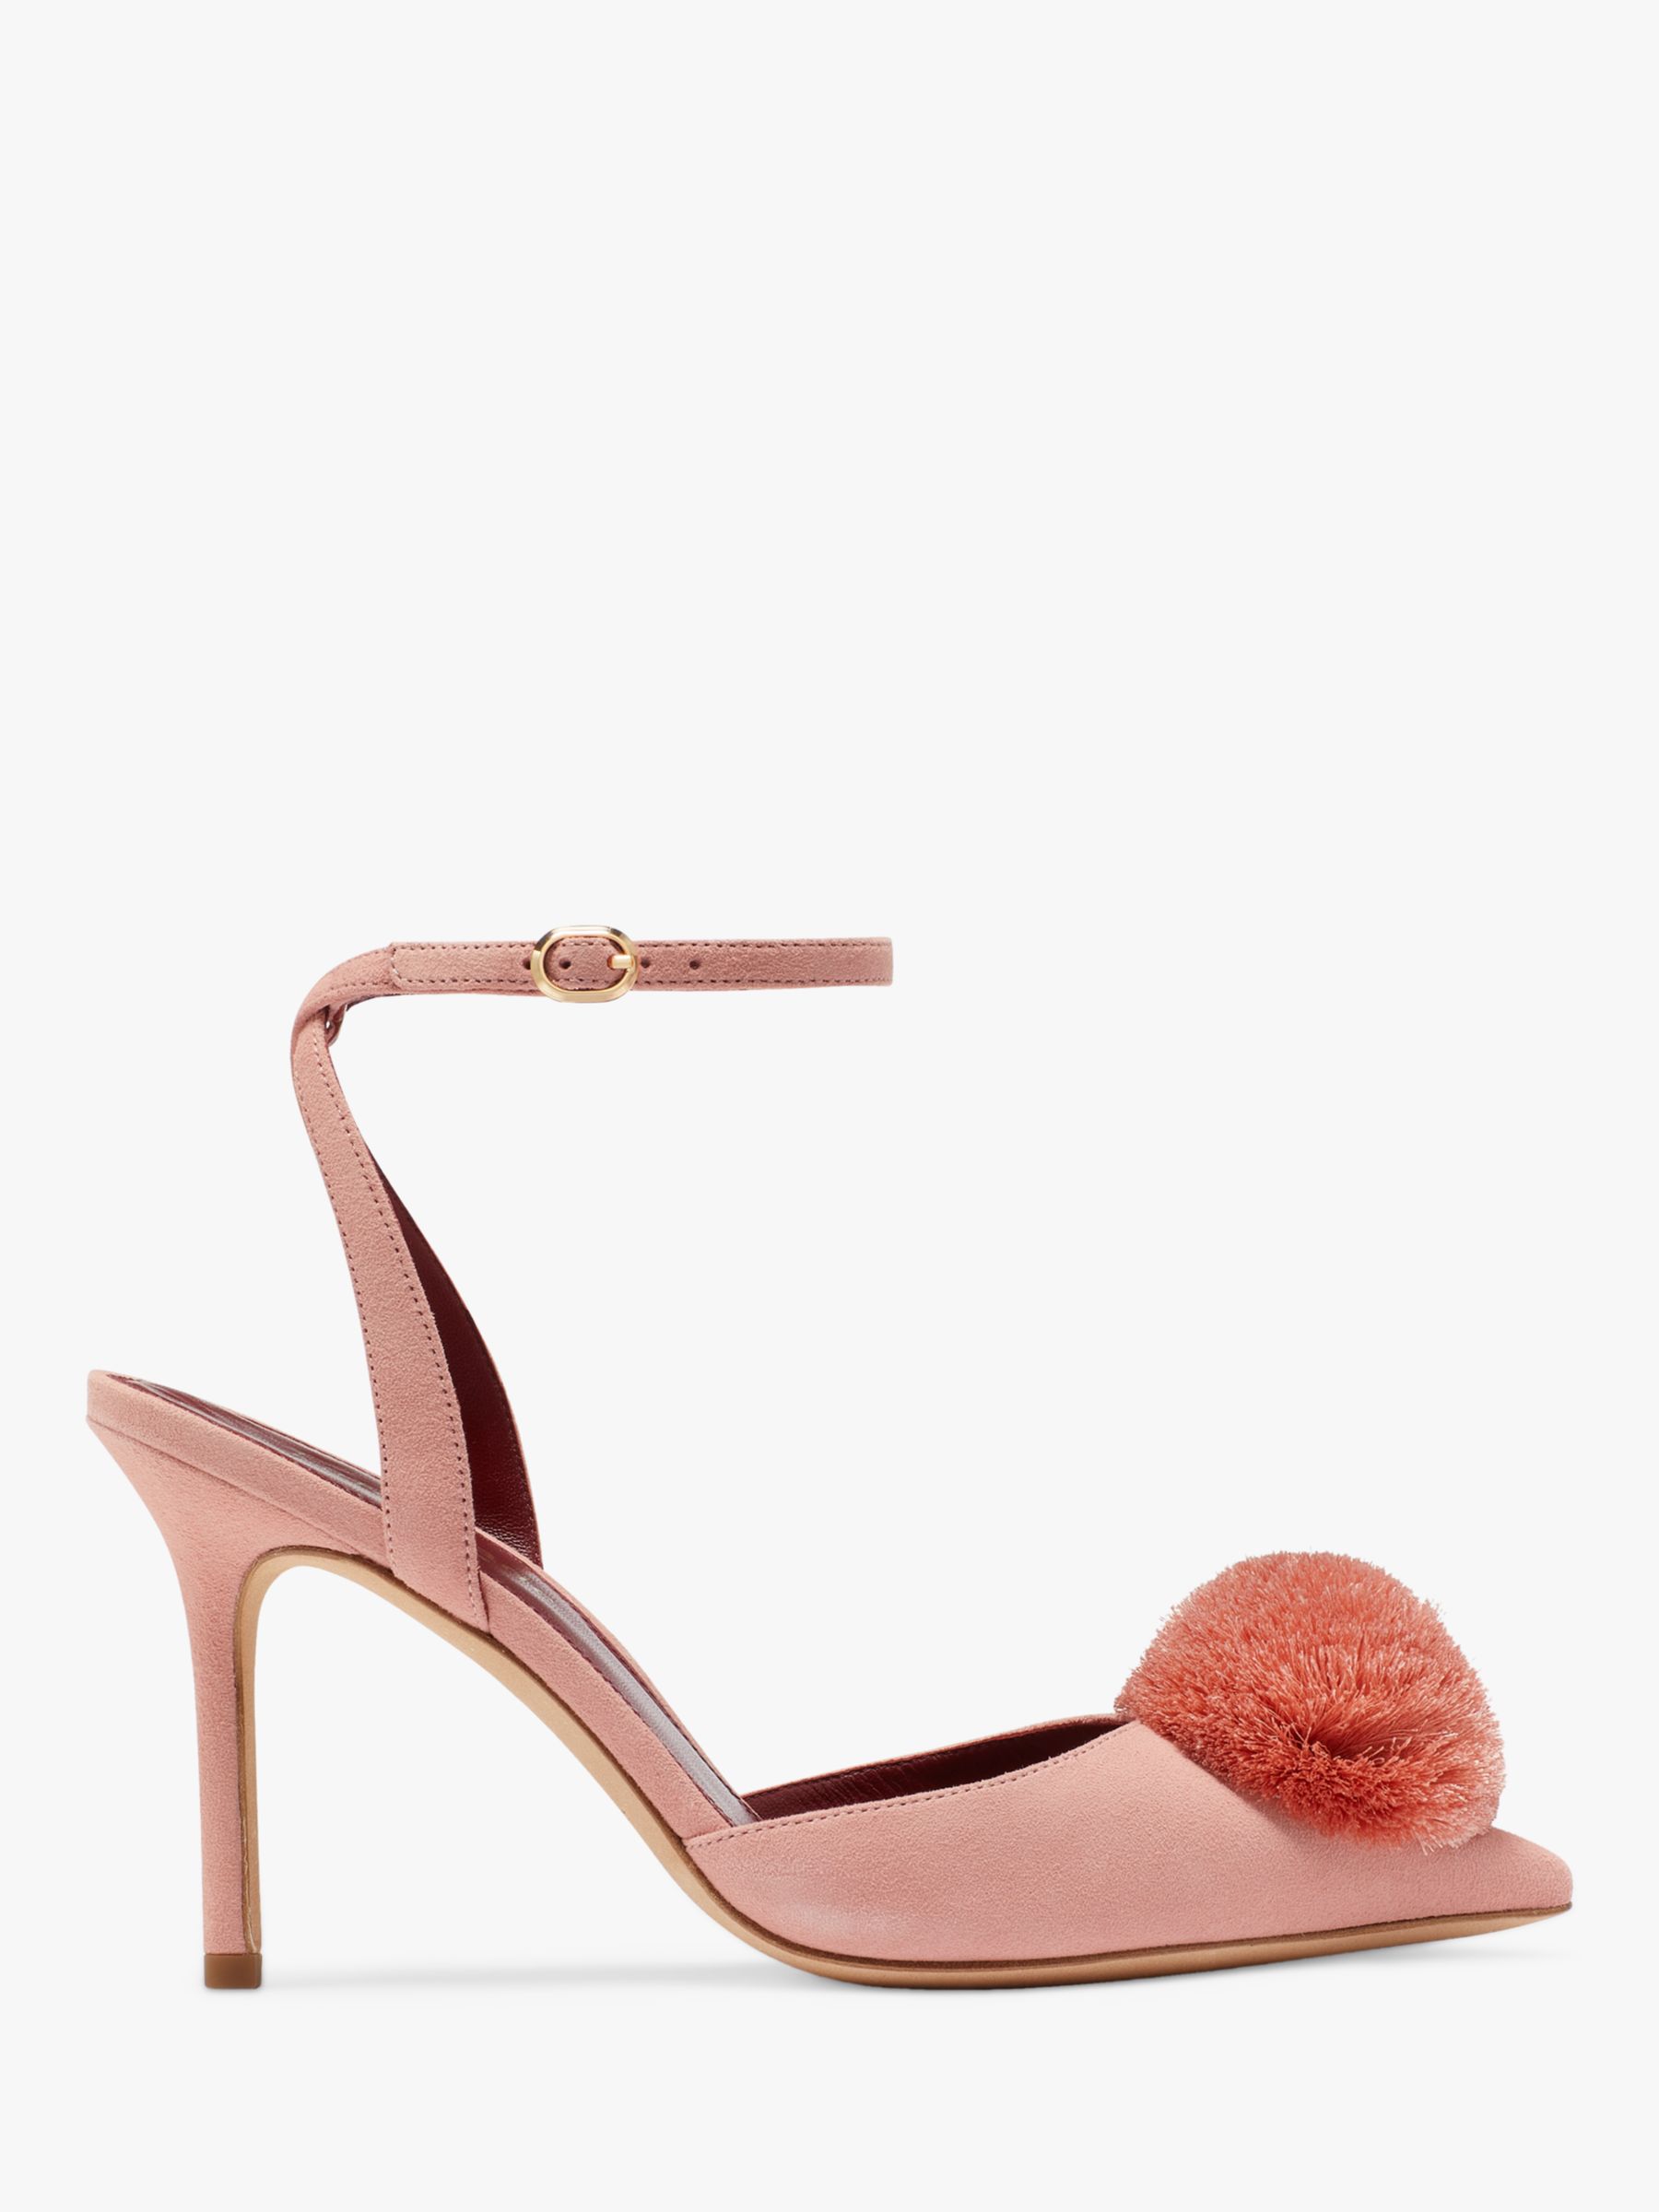 kate spade new york Armour Pom Ankle Strap Court Shoe, Dancer Pink